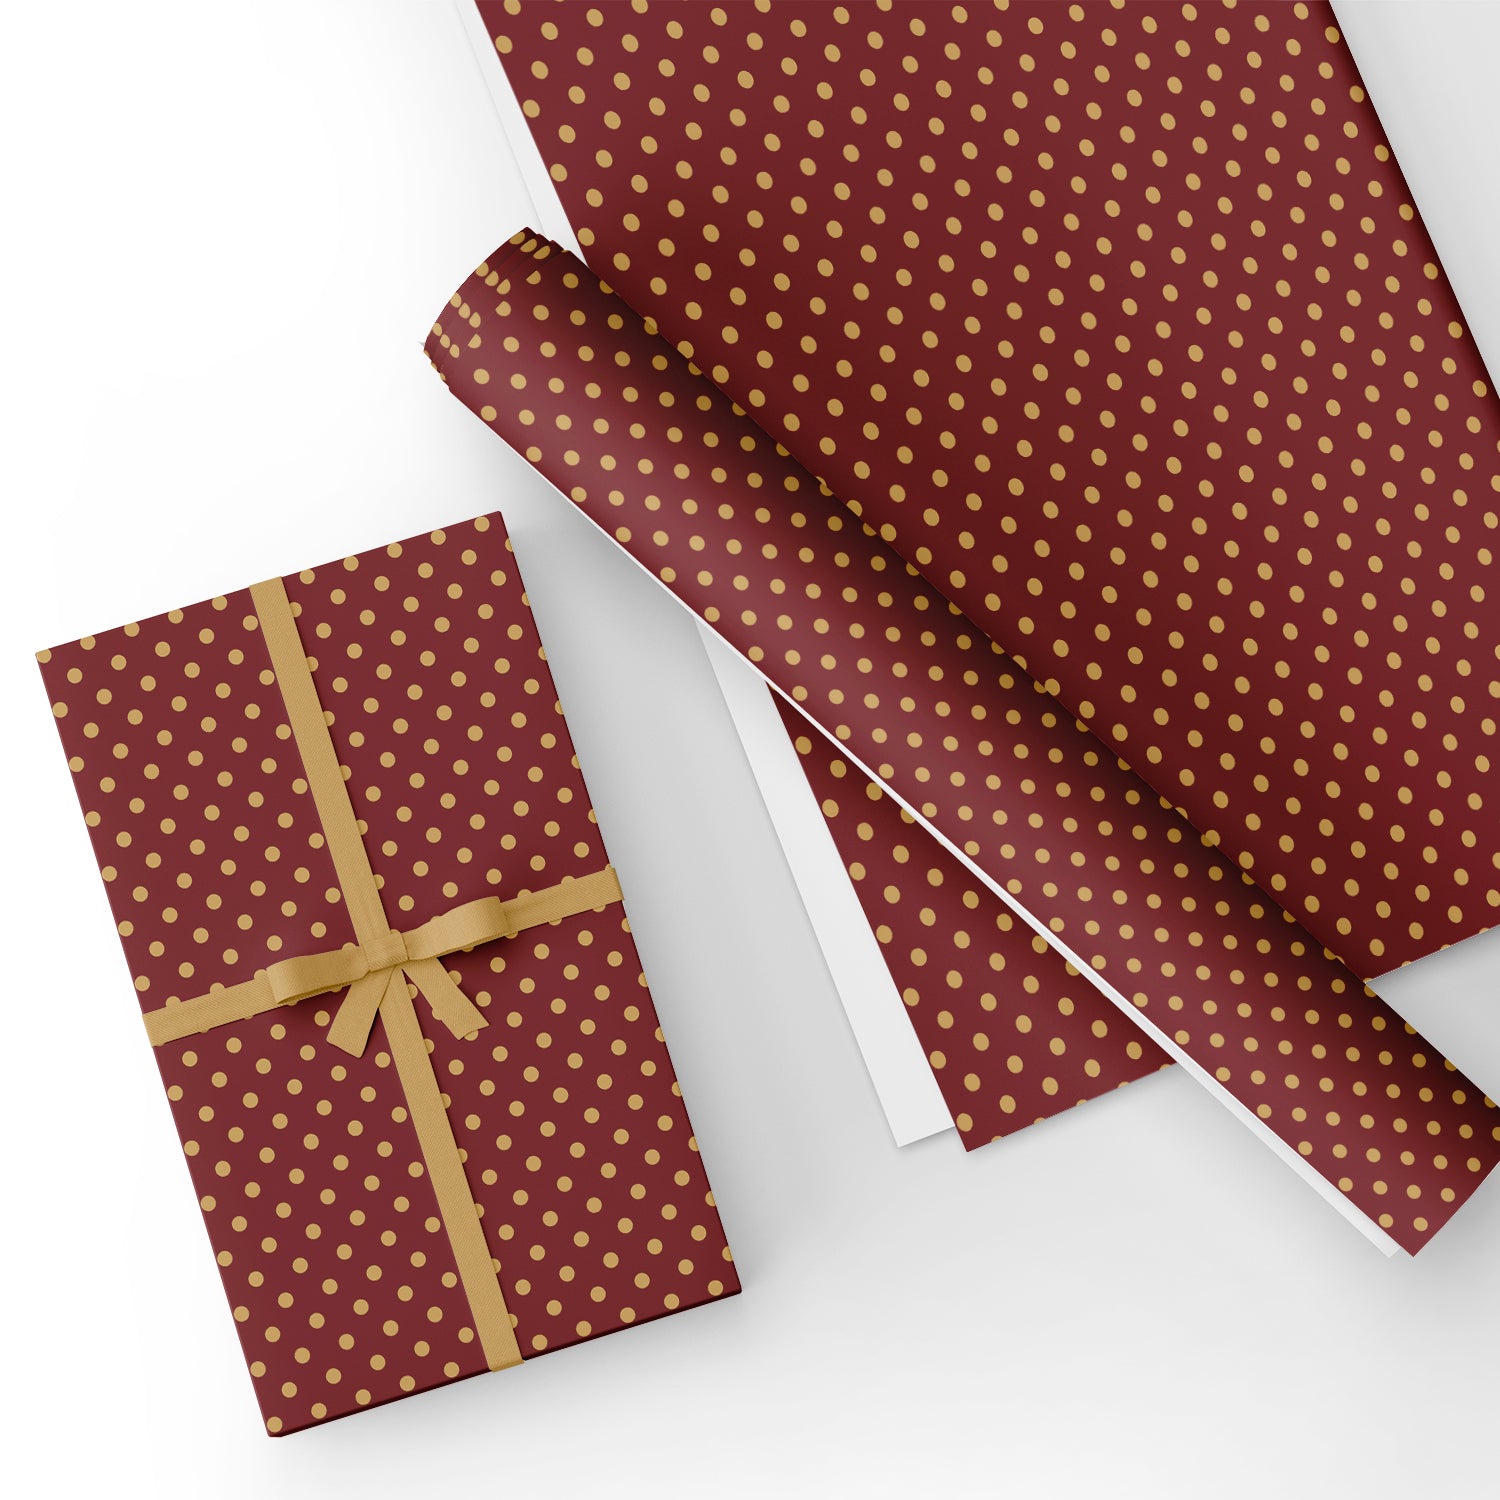 Gold and Red Polka Dots Flat Wrapping Paper Sheet Wholesale Wraphaholic